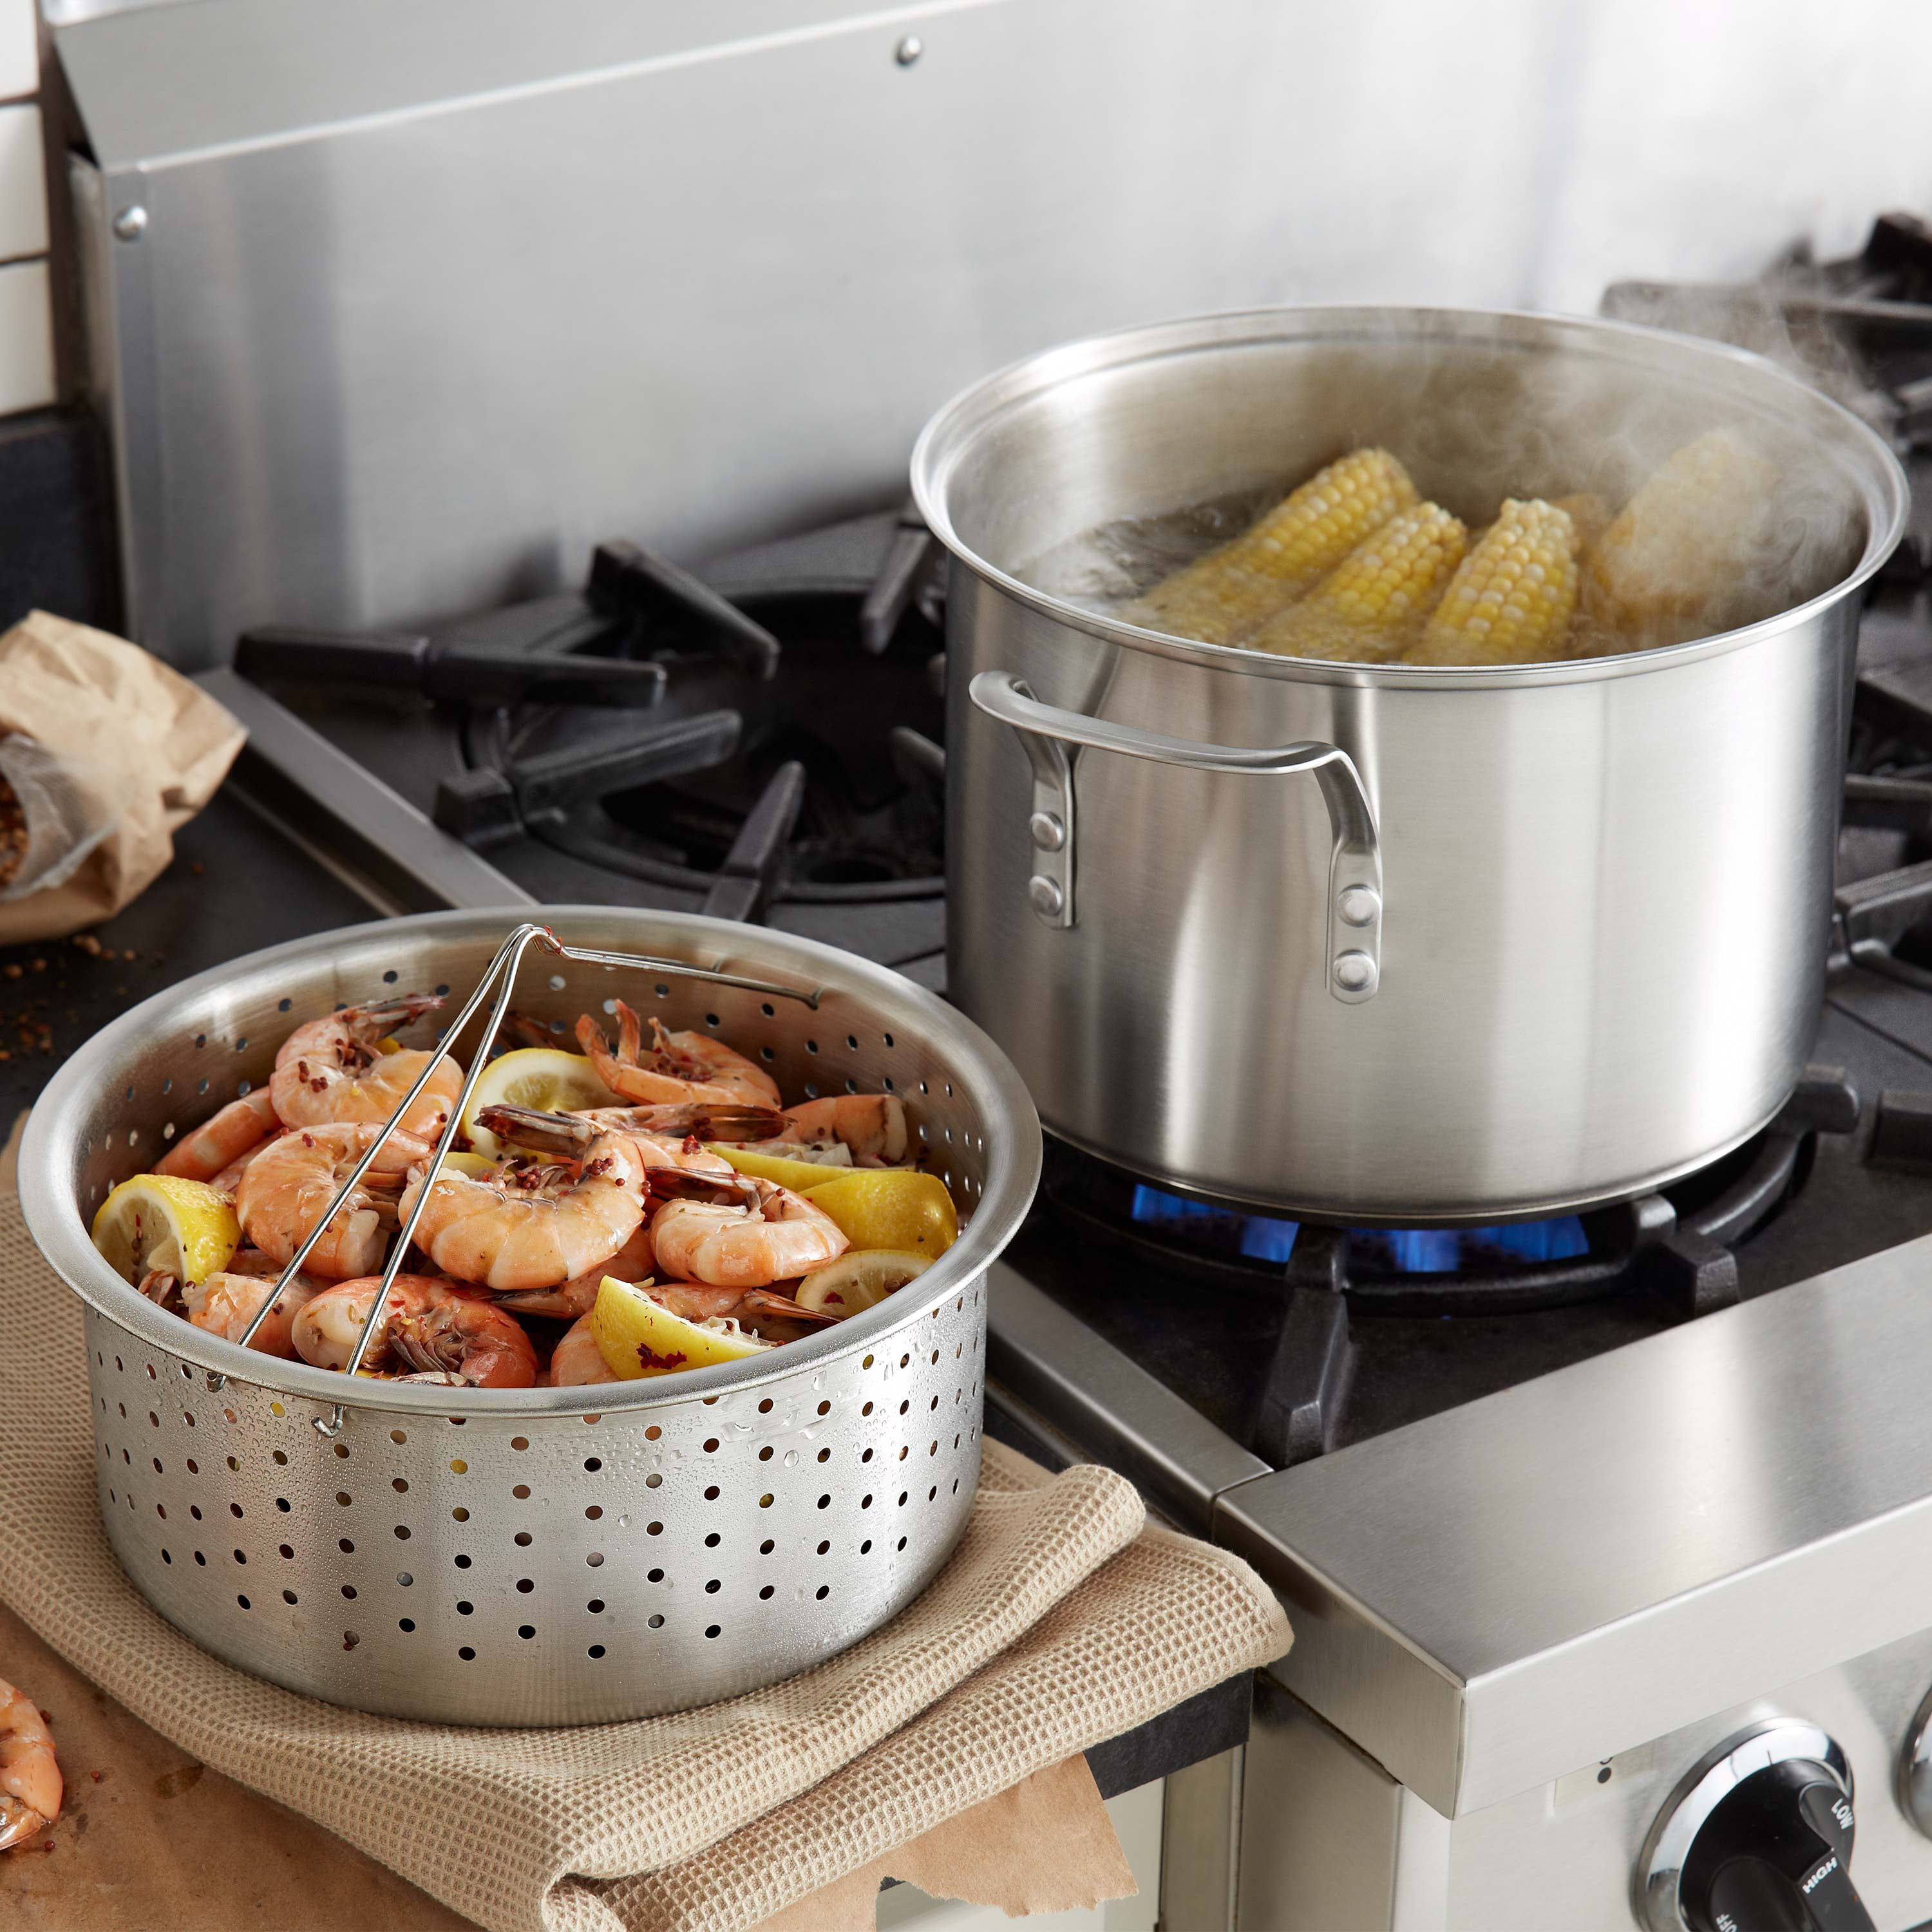 Classic™ Stainless Steel 8-Quart Multi Pot with Cover